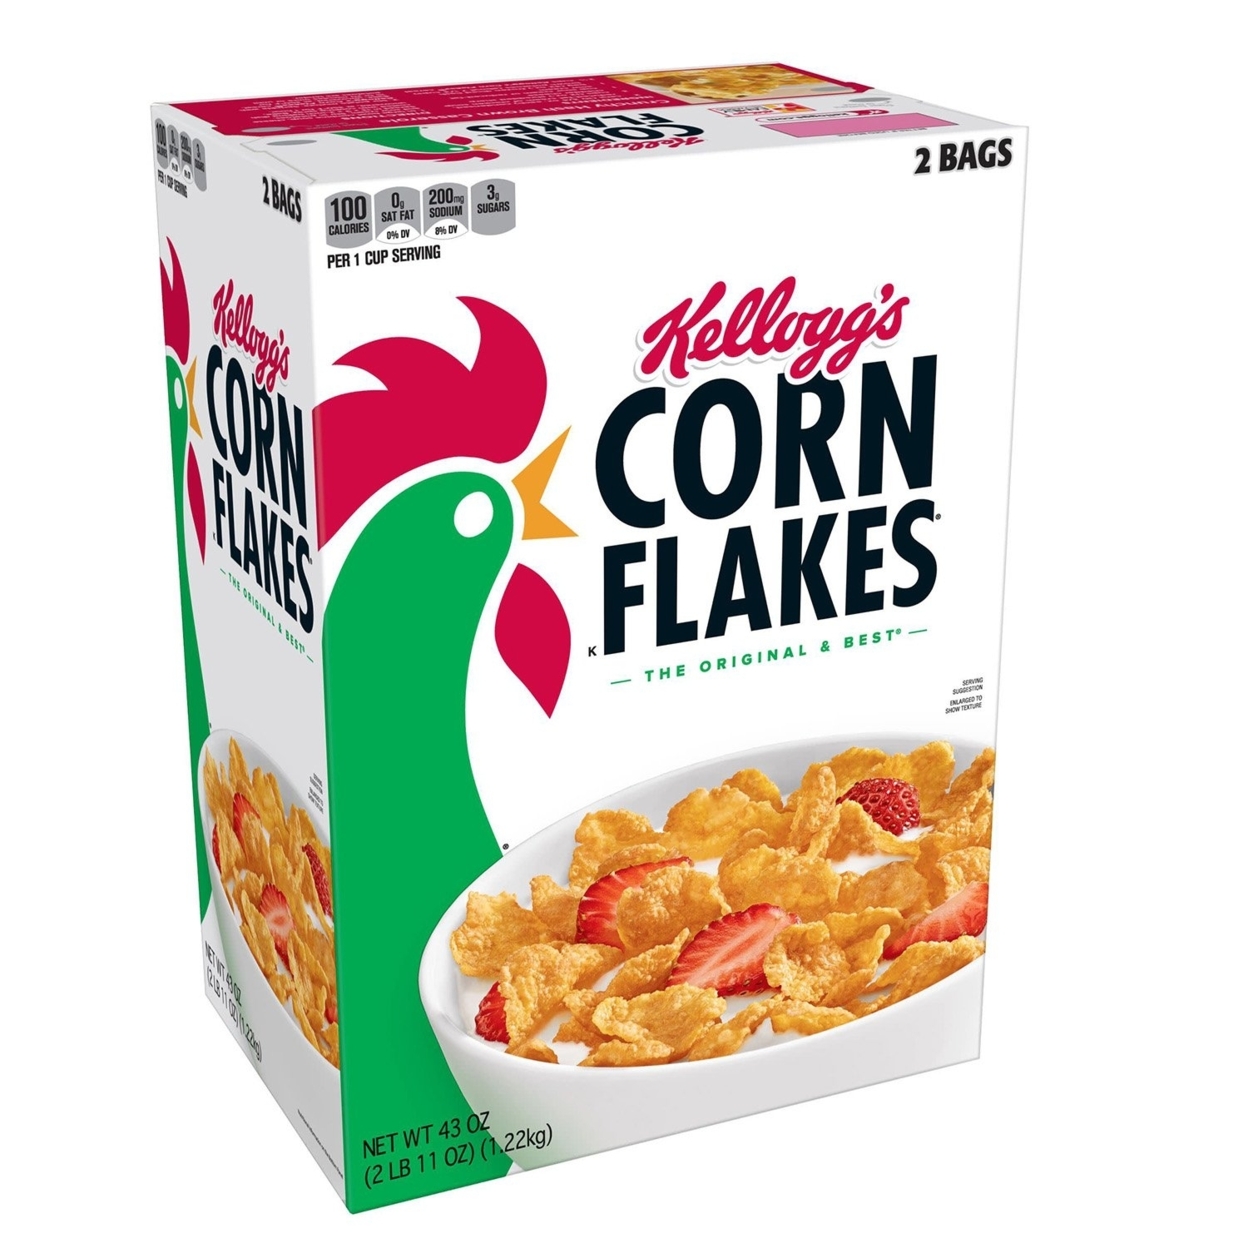 Kellogg's Corn Flakes Cereal 43.0 Total Ounce Two Bag Value Box